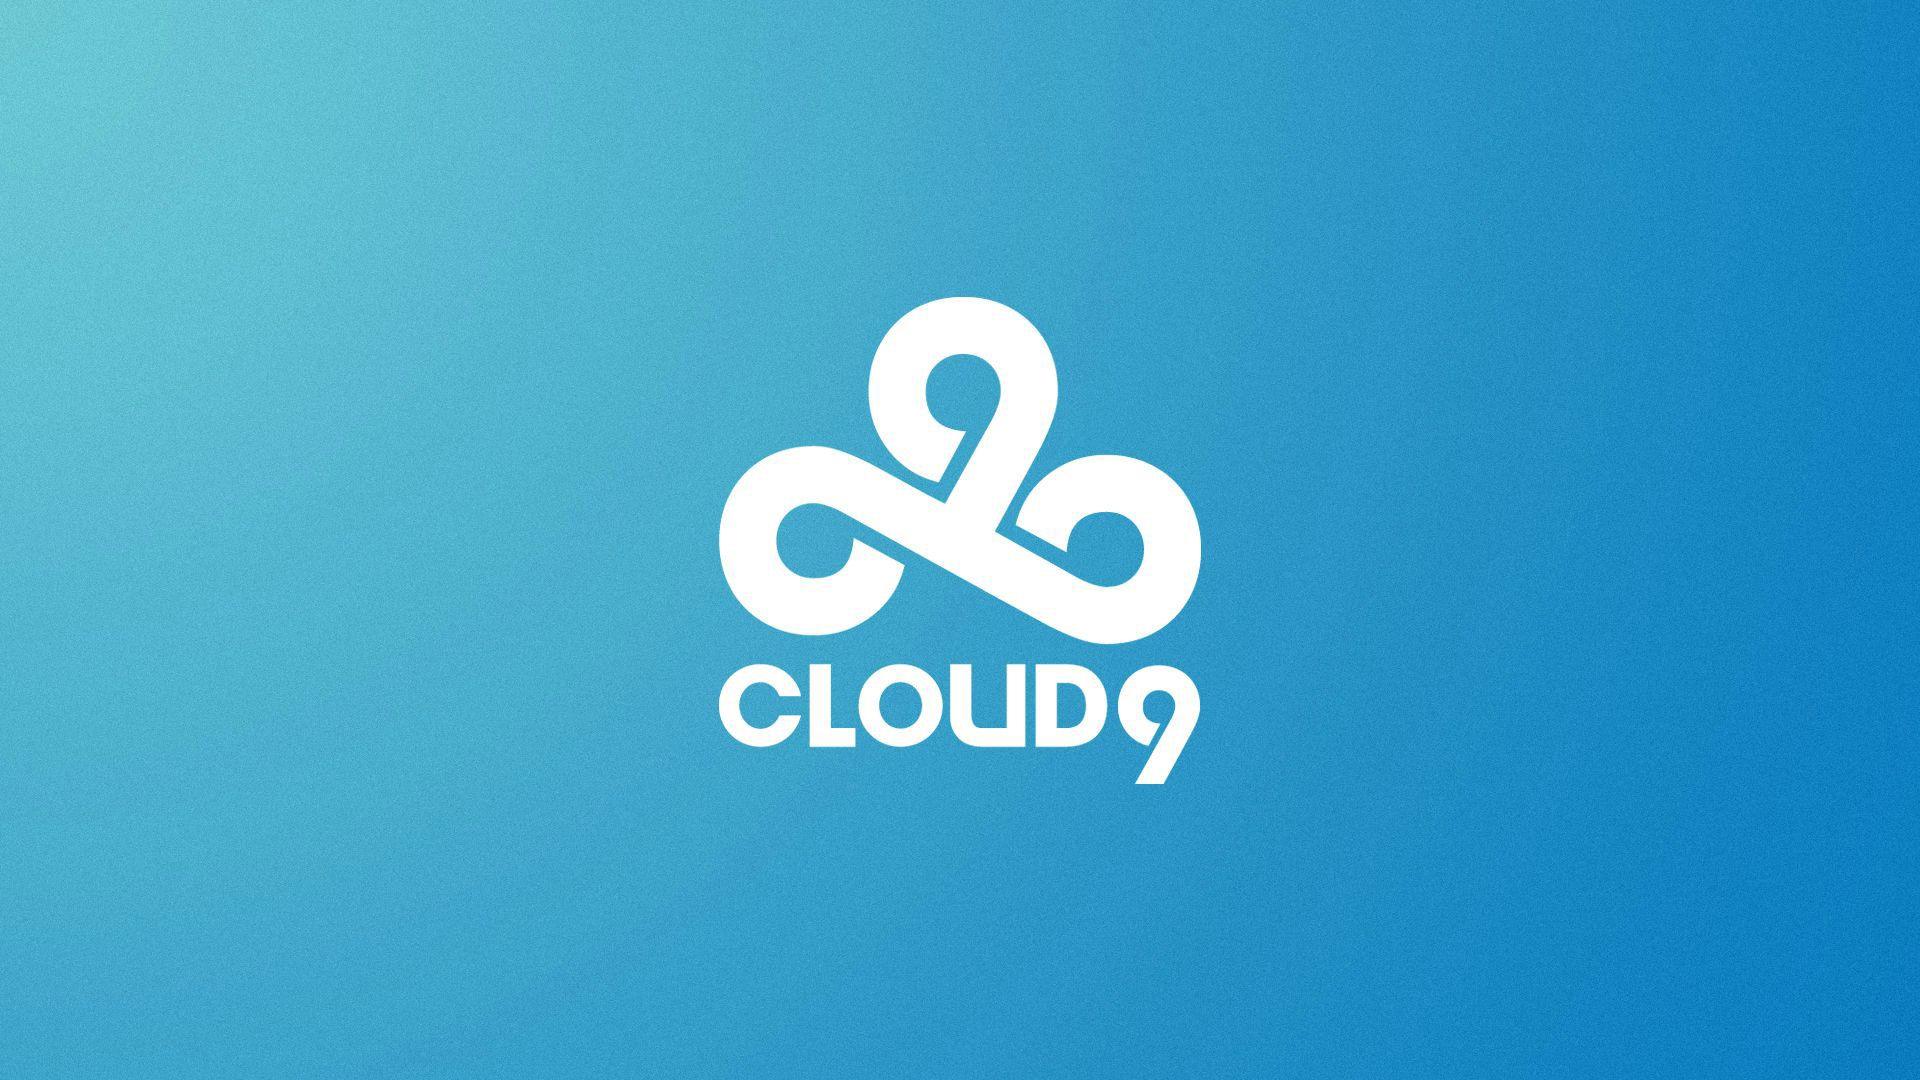 Cloud 9 Csgo HD Wallpapers (94+ images)